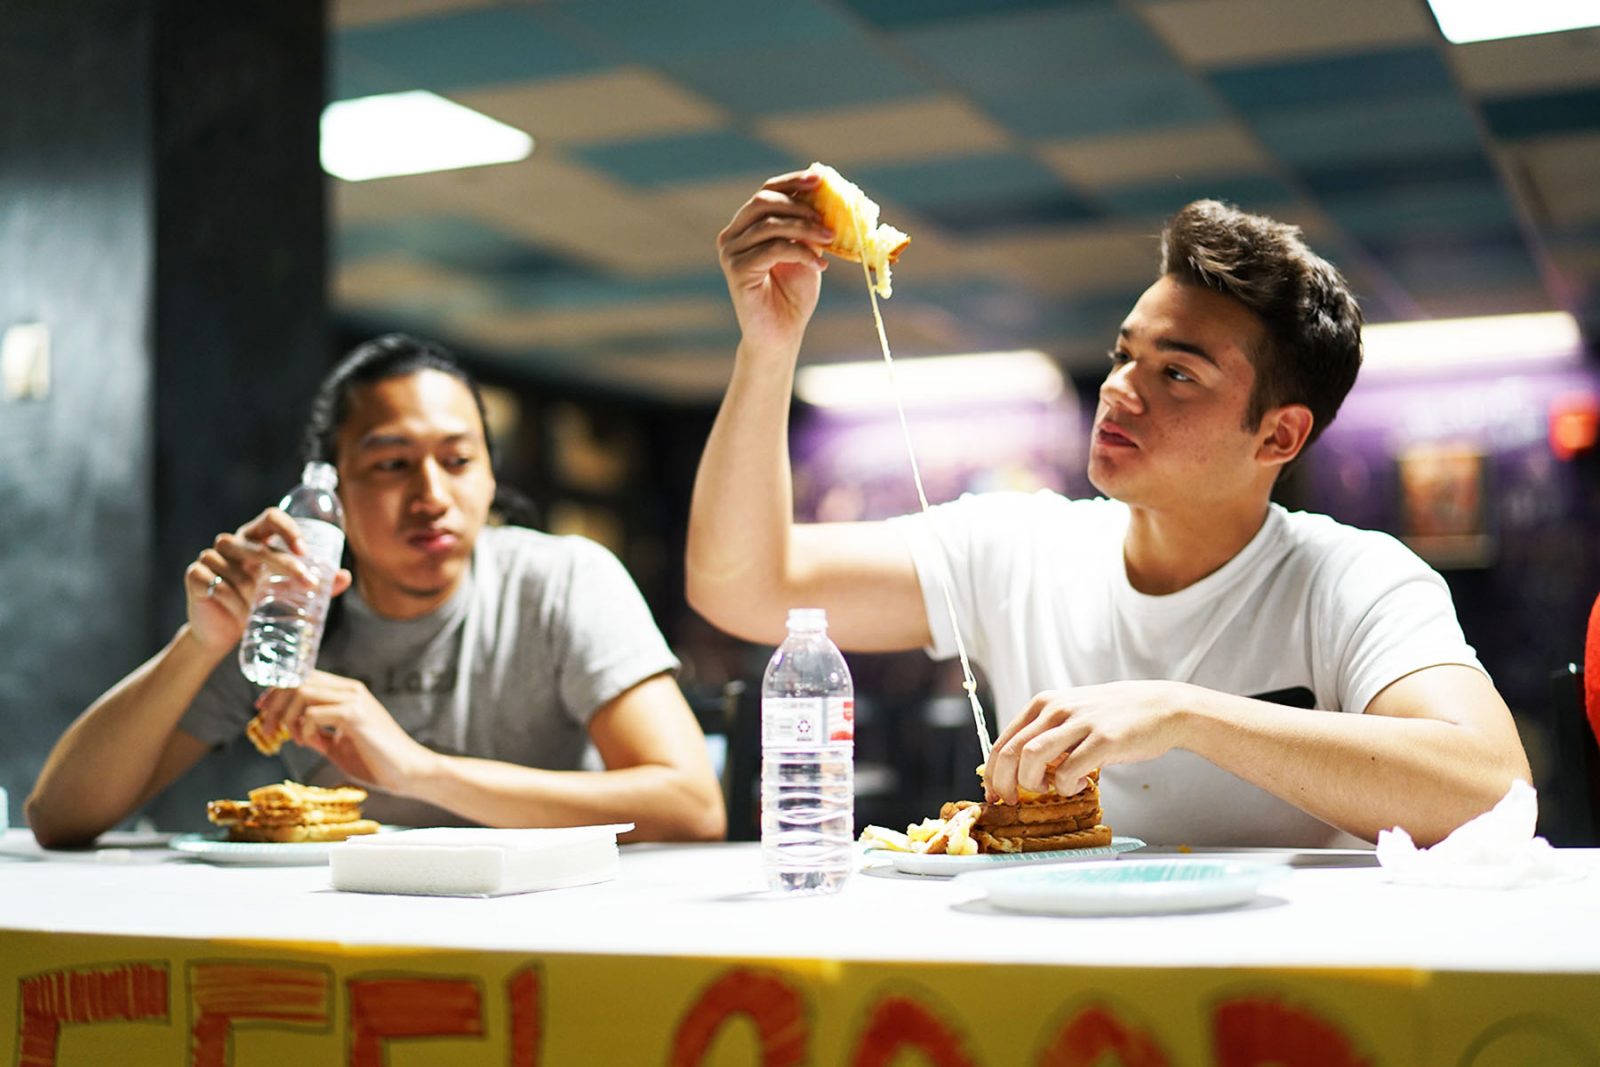 Grilled cheese eating contest raises awareness for sustainability The